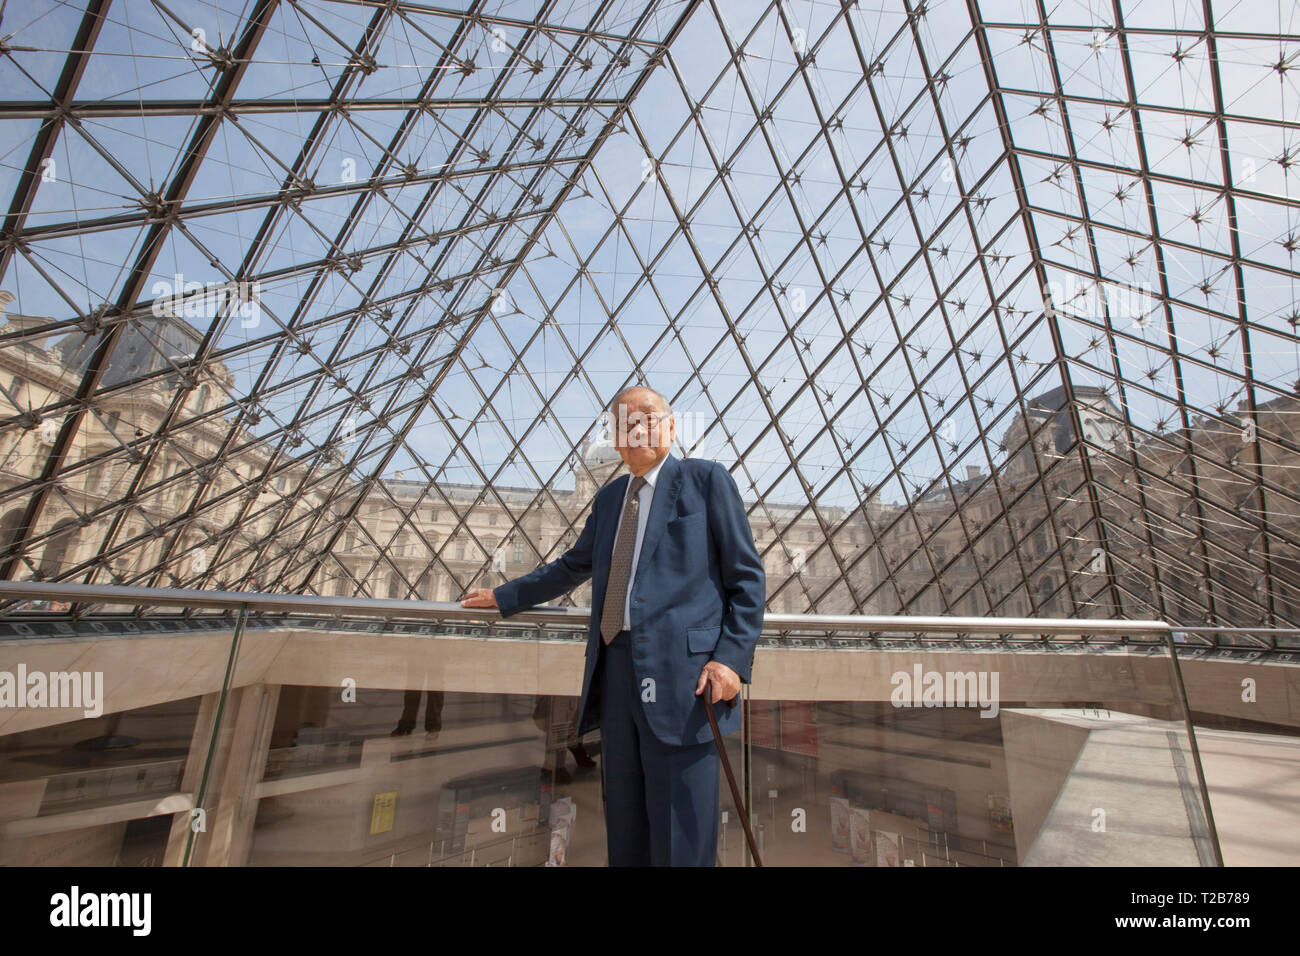 IEOH MING PEI  AND LOUVRE PYRAMID Stock Photo